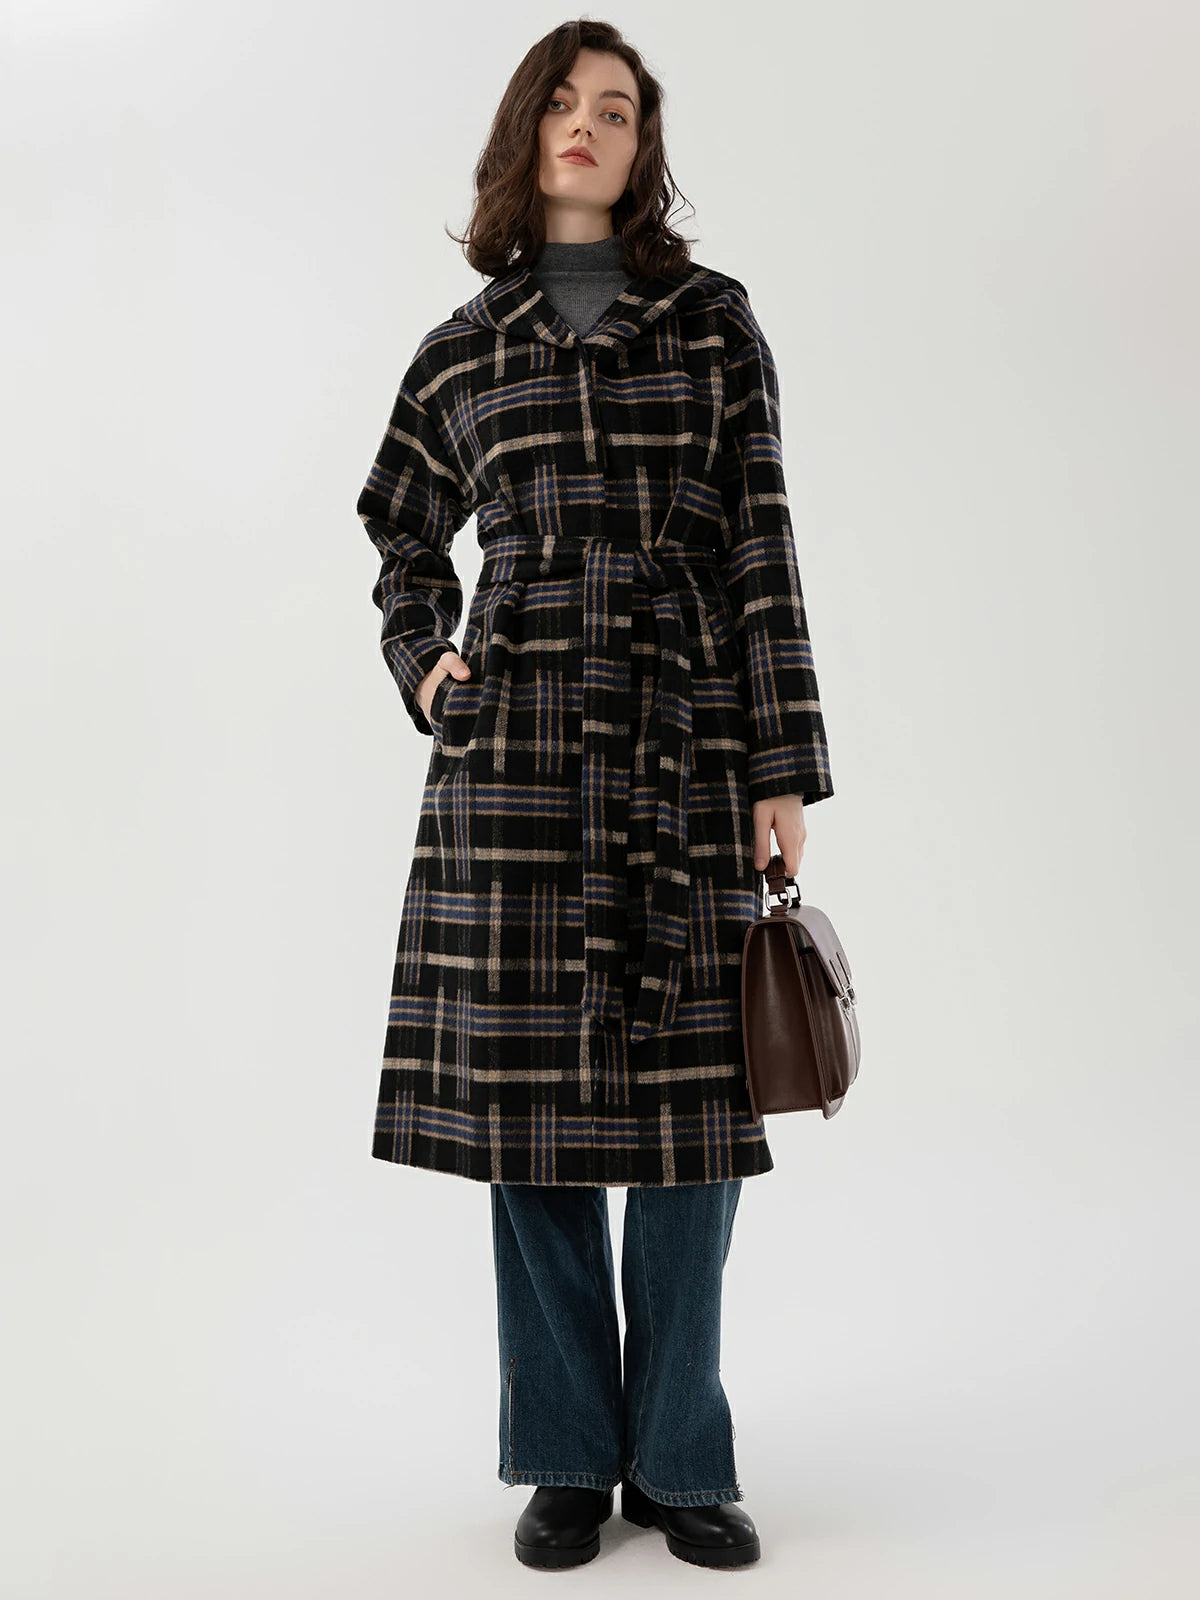 Comfortable fit and stylish details in a hooded coat with vintage flair